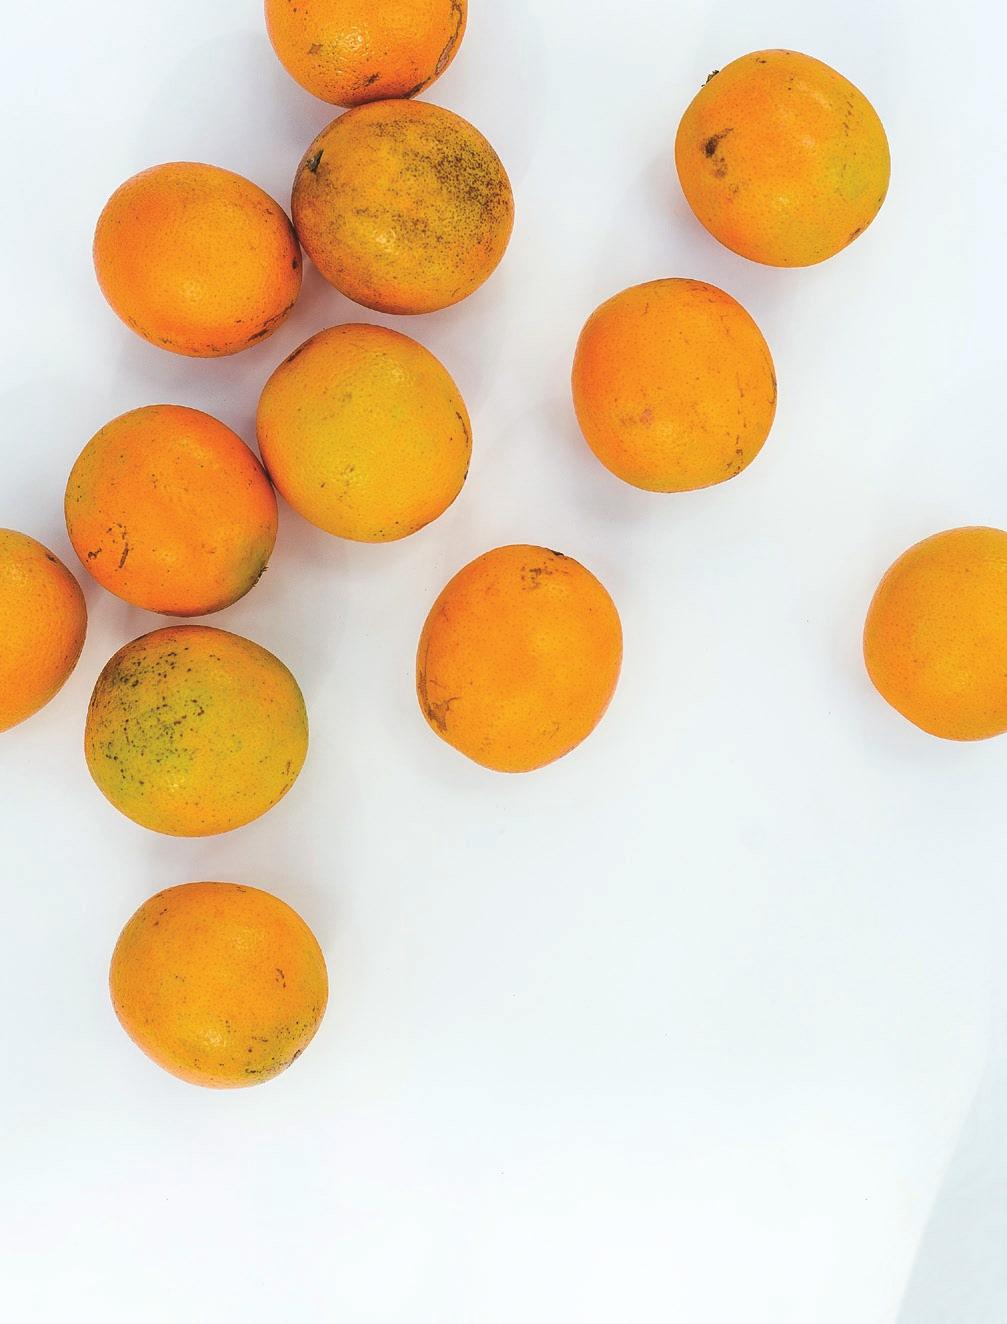 New sweet orange cultivars The Florida citrus industry now has additional options, thanks to the Citrus Cultivar Improvement Team at the UF/IFAS Citrus Research and Education Center.